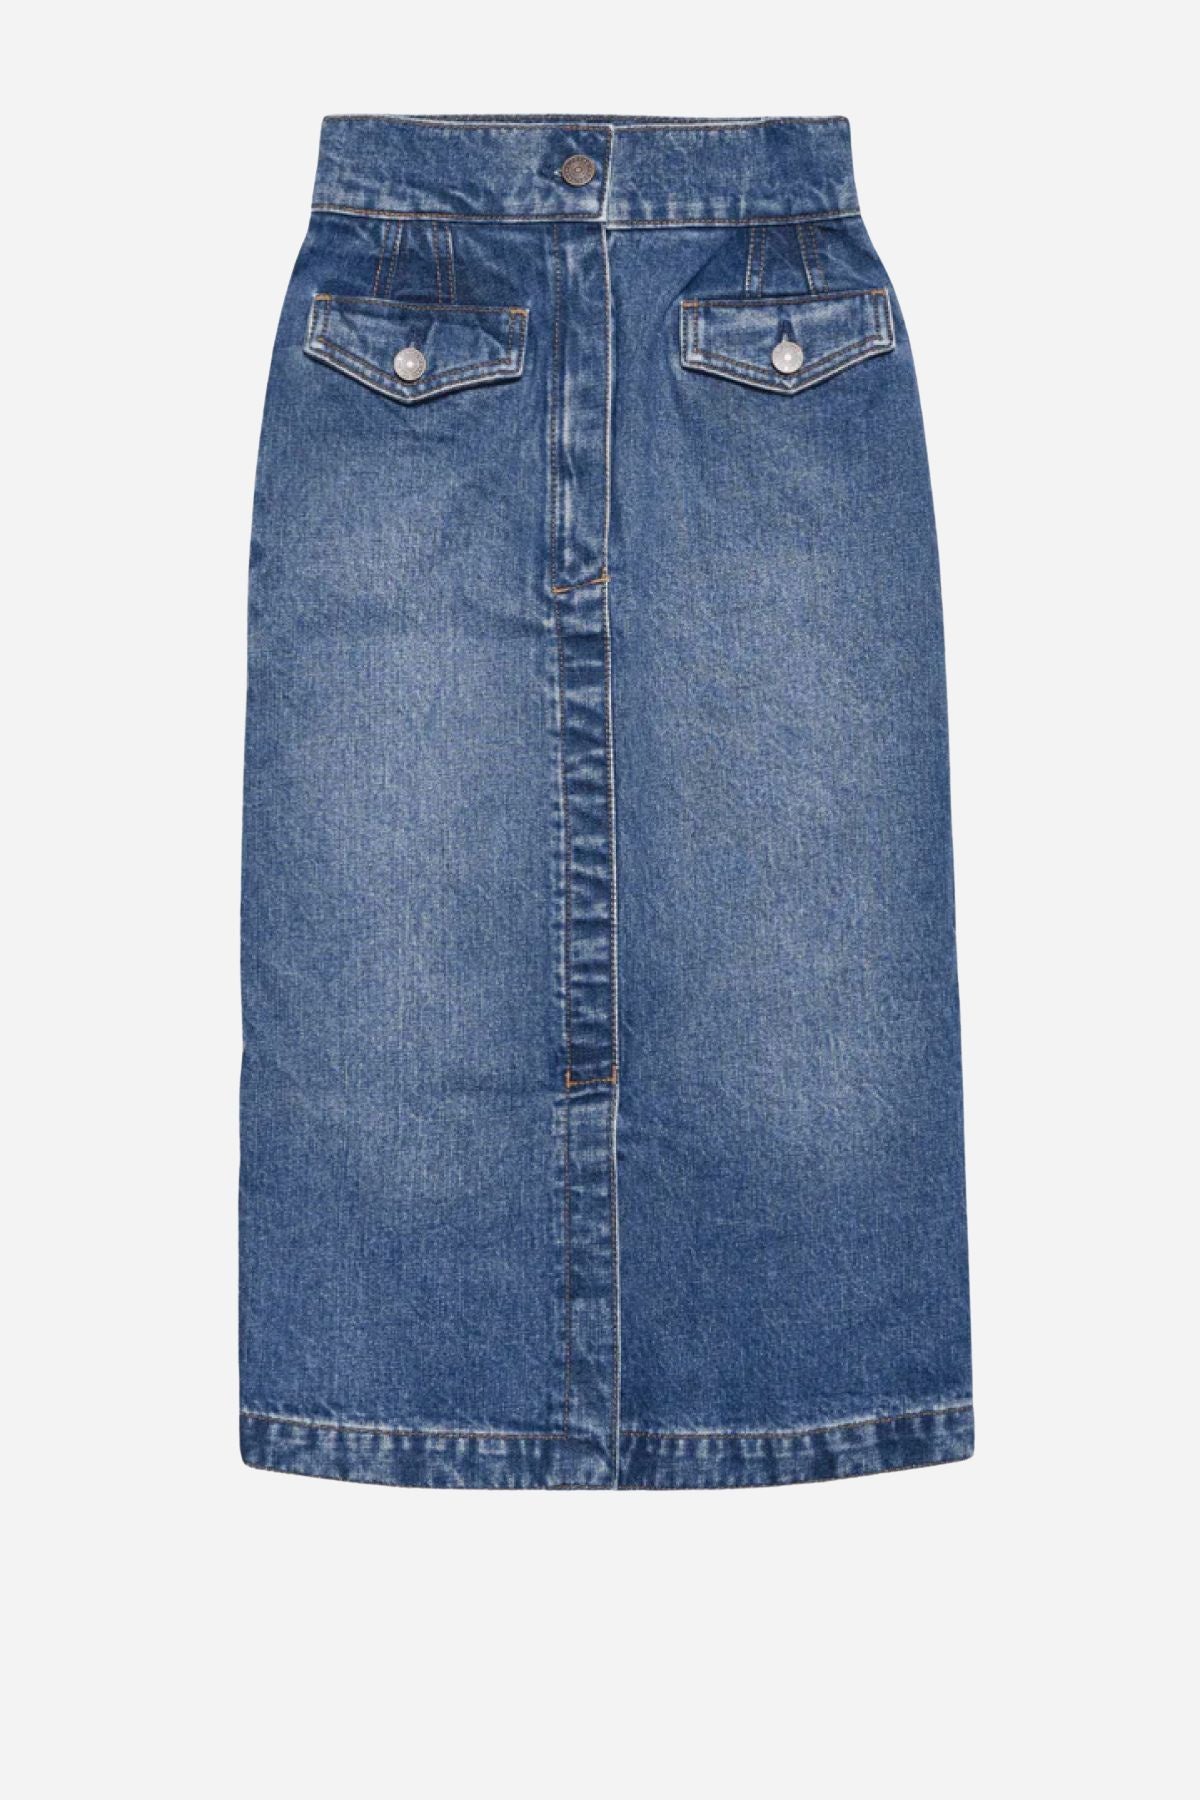 Frame Denim The Vent Front Skirt - Pearl District